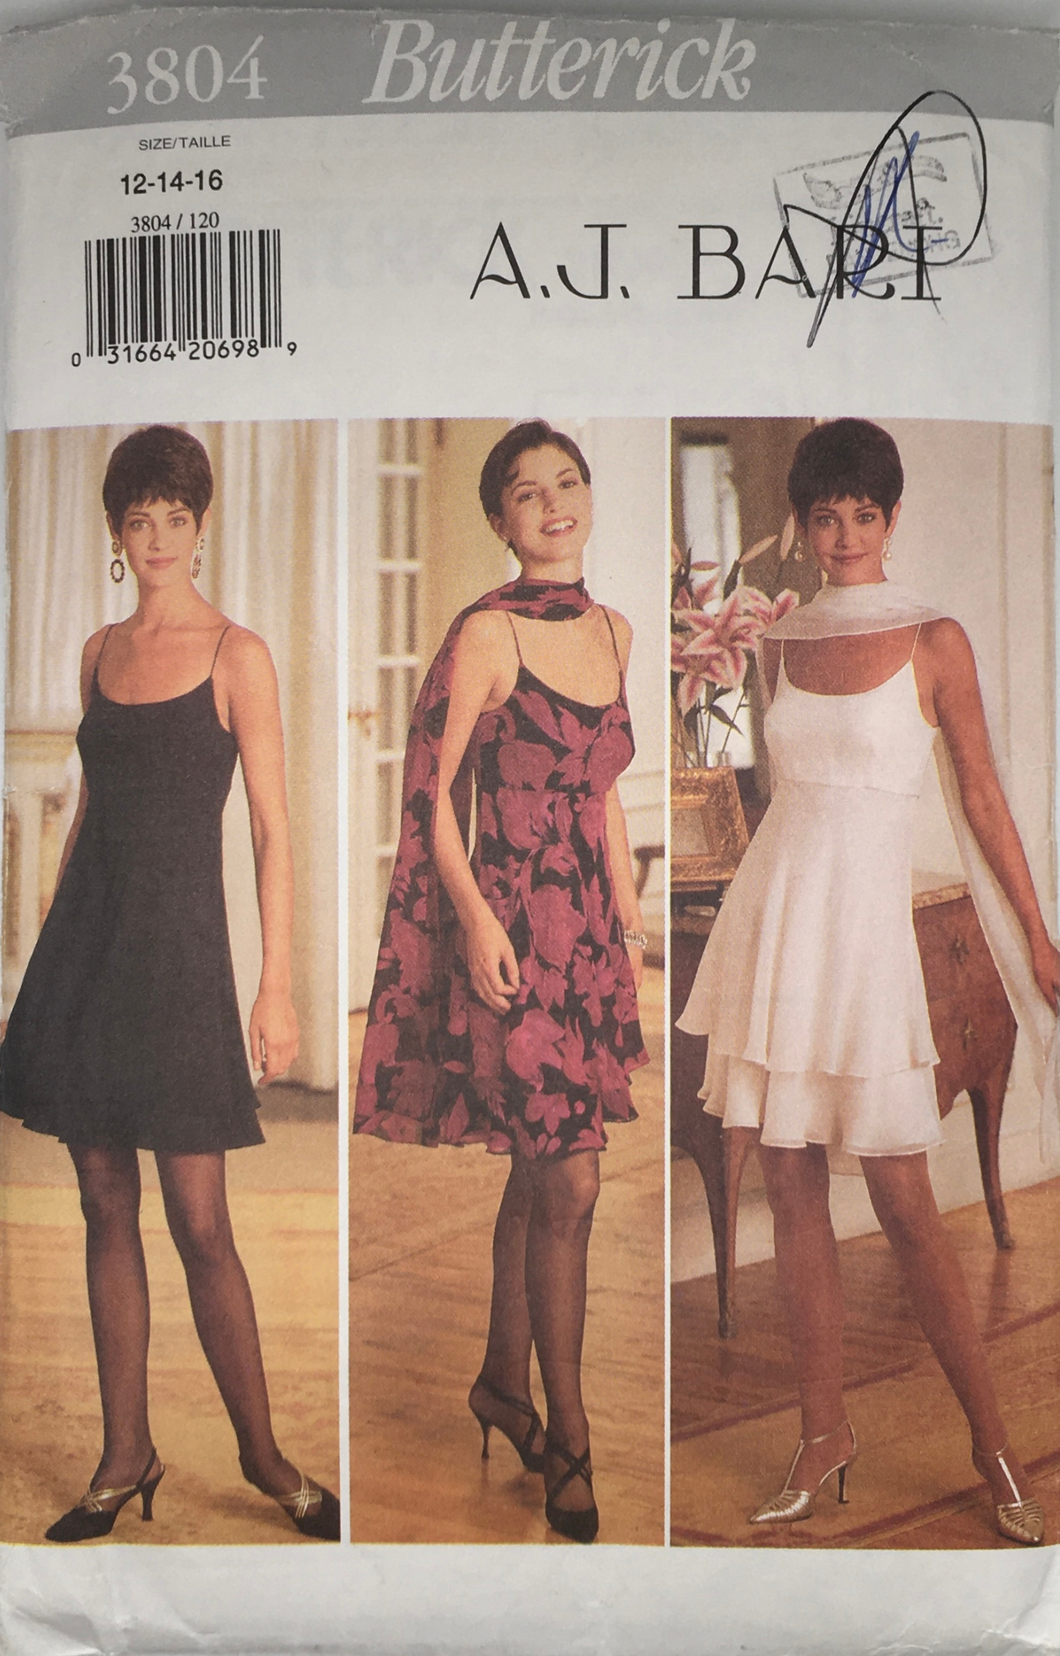 1994 Vintage Sewing Pattern: Butterick 3804